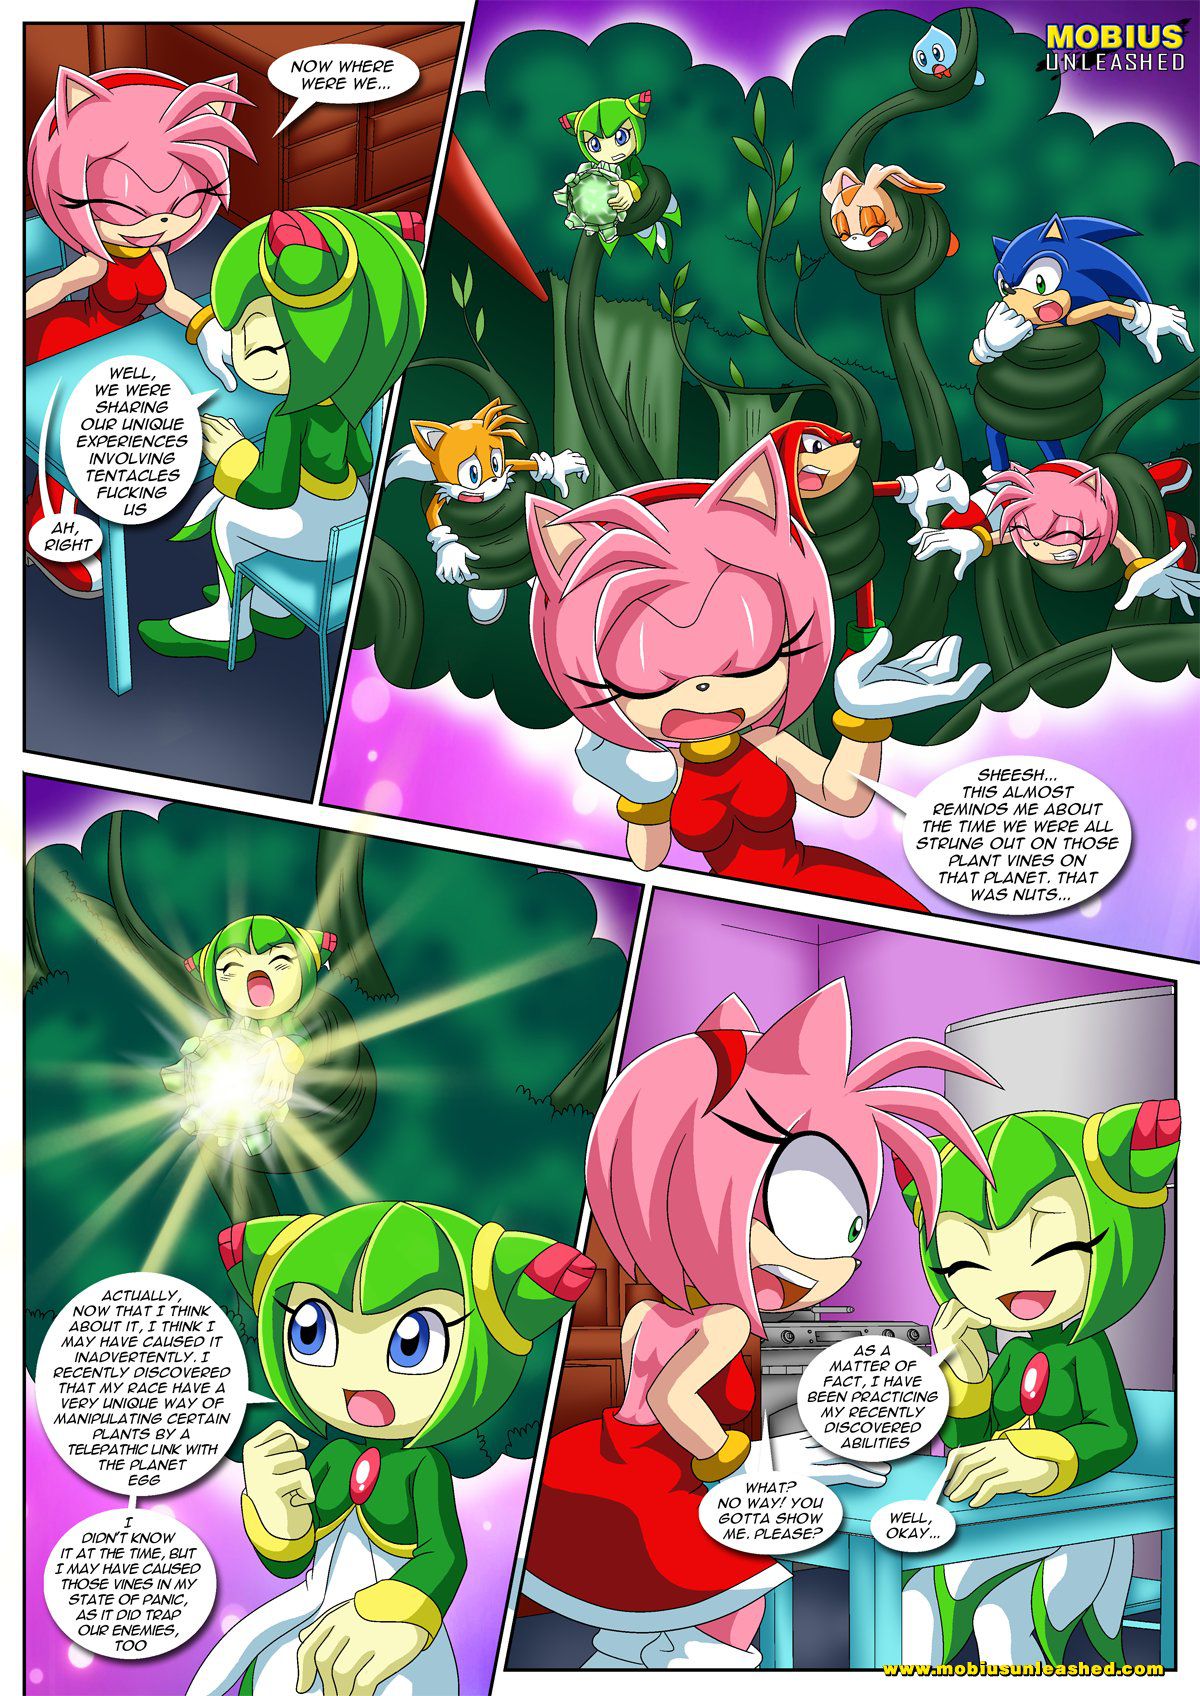 [Palcomix] Team GF's Tentacled Tale (Sonic The Hedgehog) [Ongoing] 4